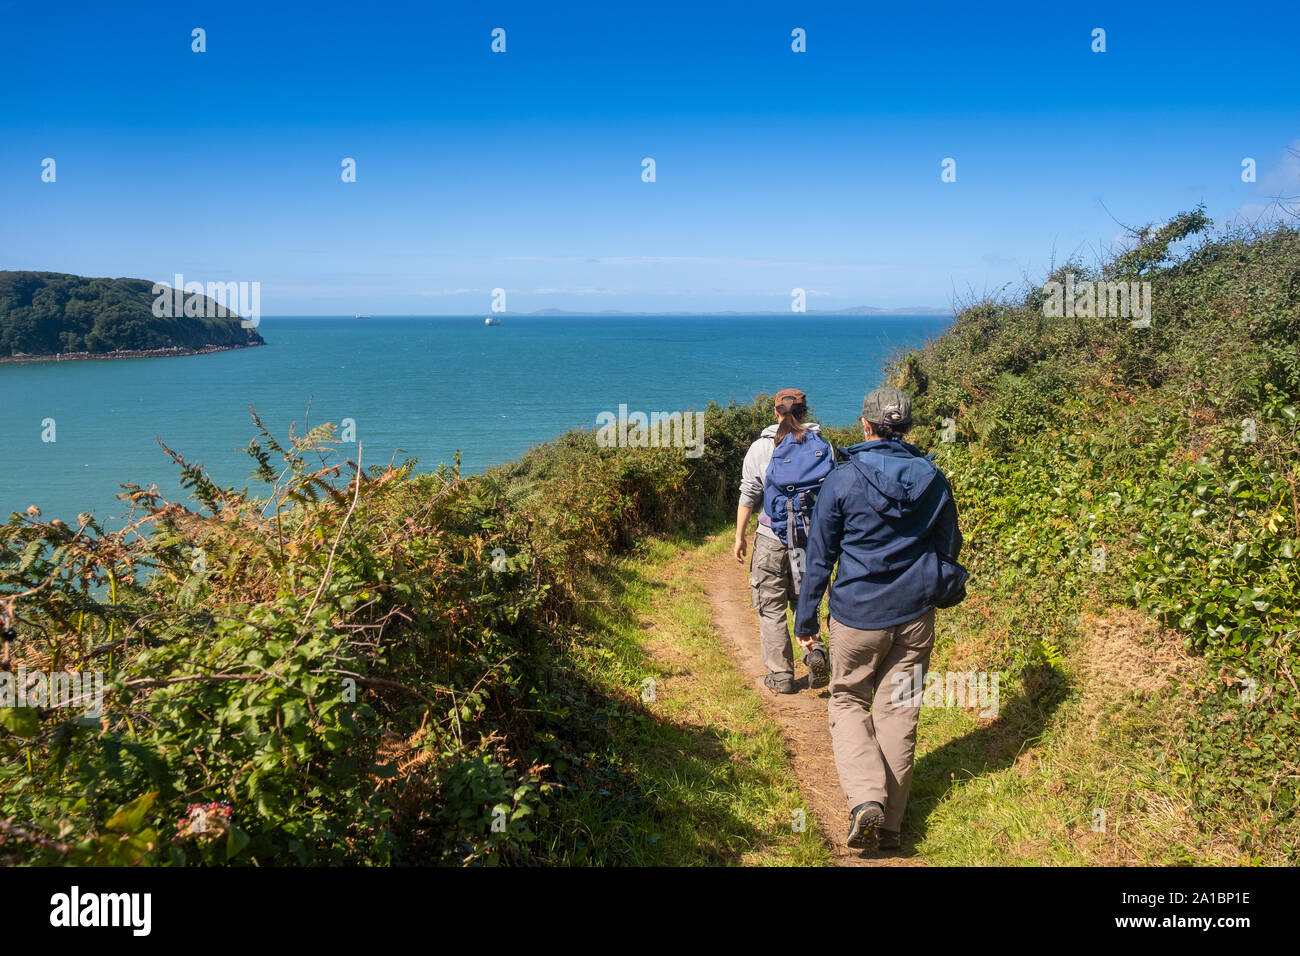 People walking on the Pembrokeshire Coastal Path near Little Haven, on the coast of St Bride's Bay, Pembrokeshire National Park, South West Wales UK Stock Photo